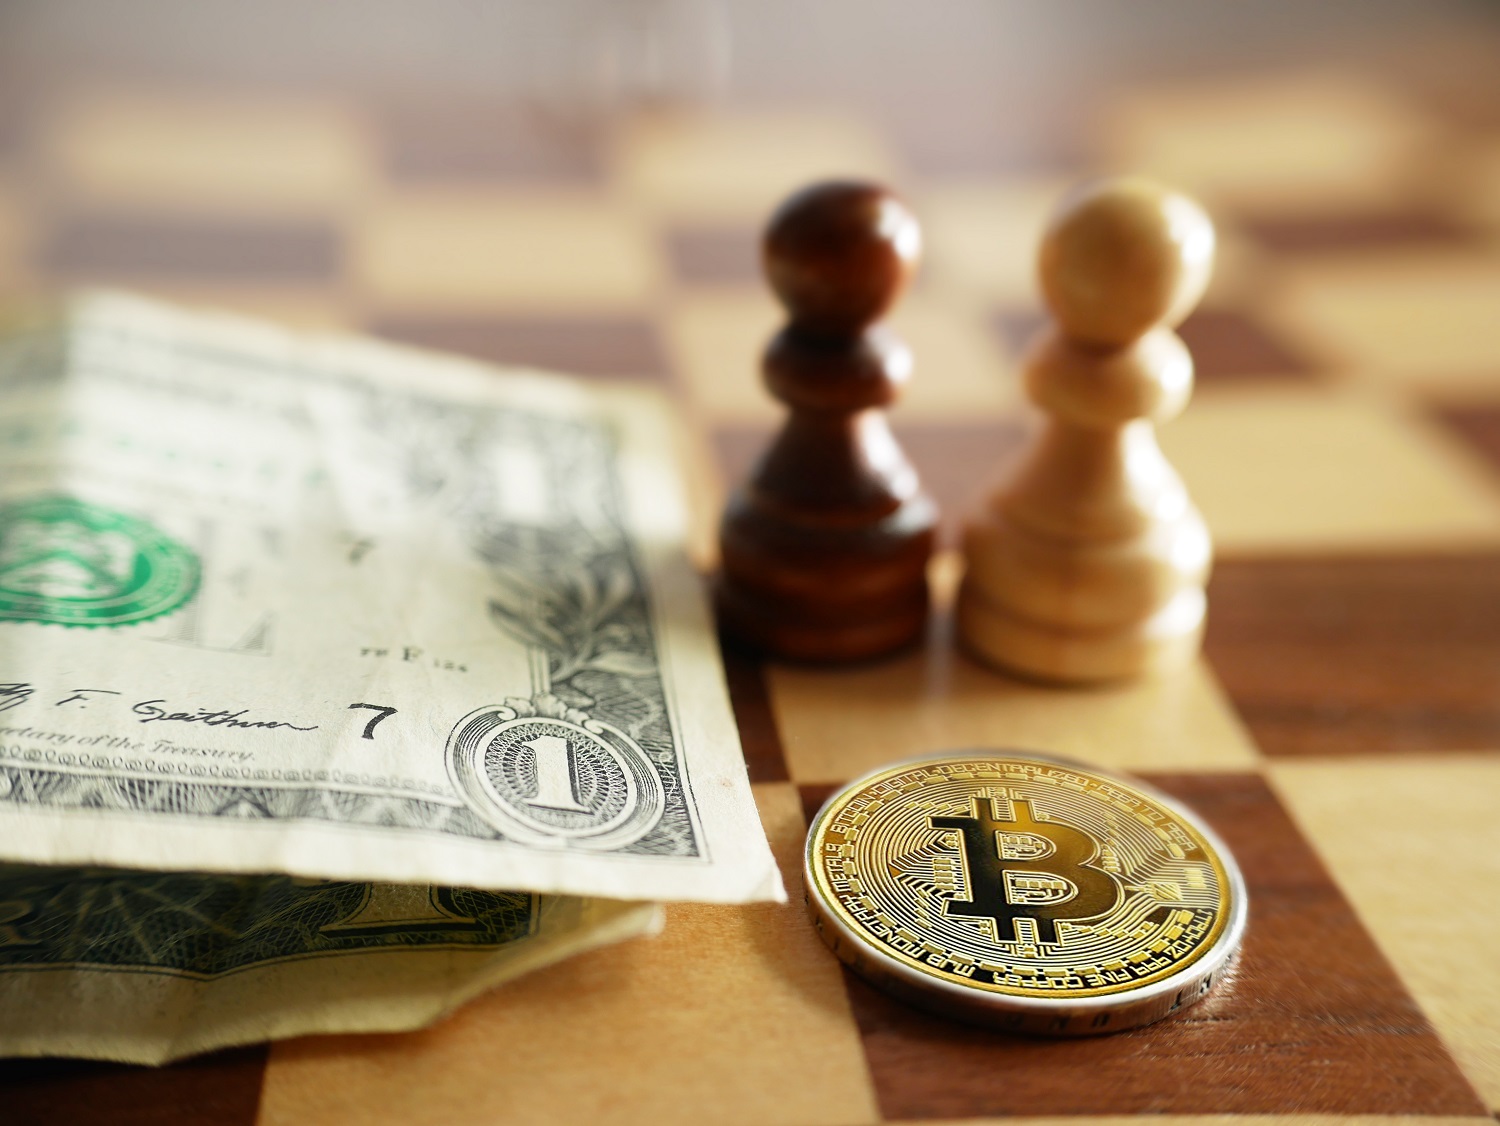 A metal token intended to represent Bitcoin next to US dollar bills on a chess board with chess pieces.